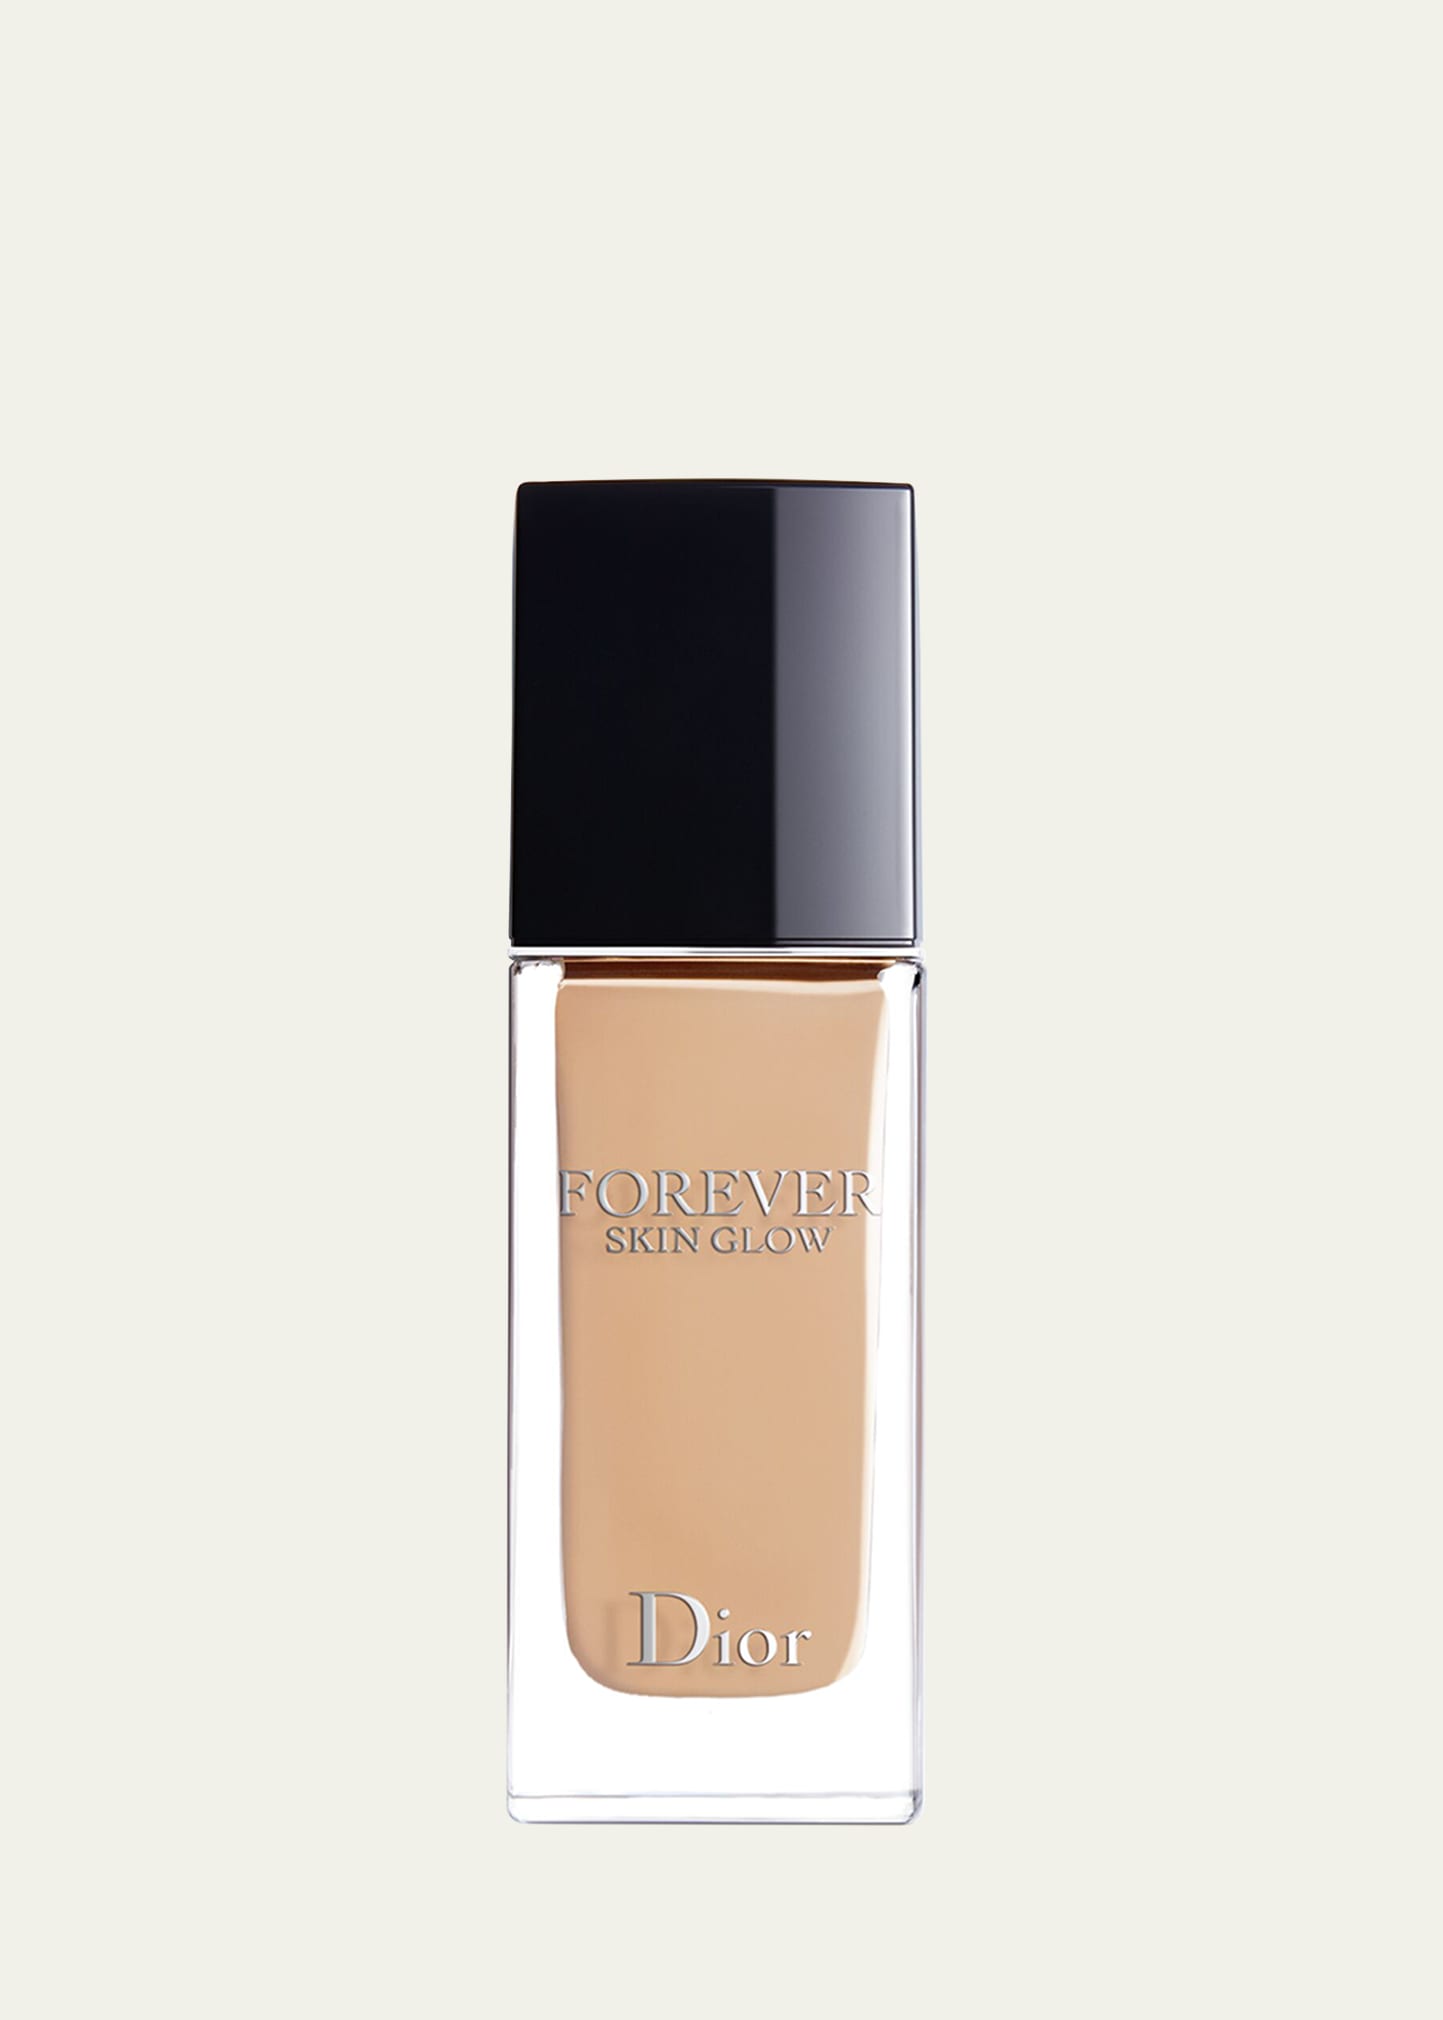 Dior 1 Oz.  Forever Skin Glow Hydrating Foundation Spf 15 In 3 Cool